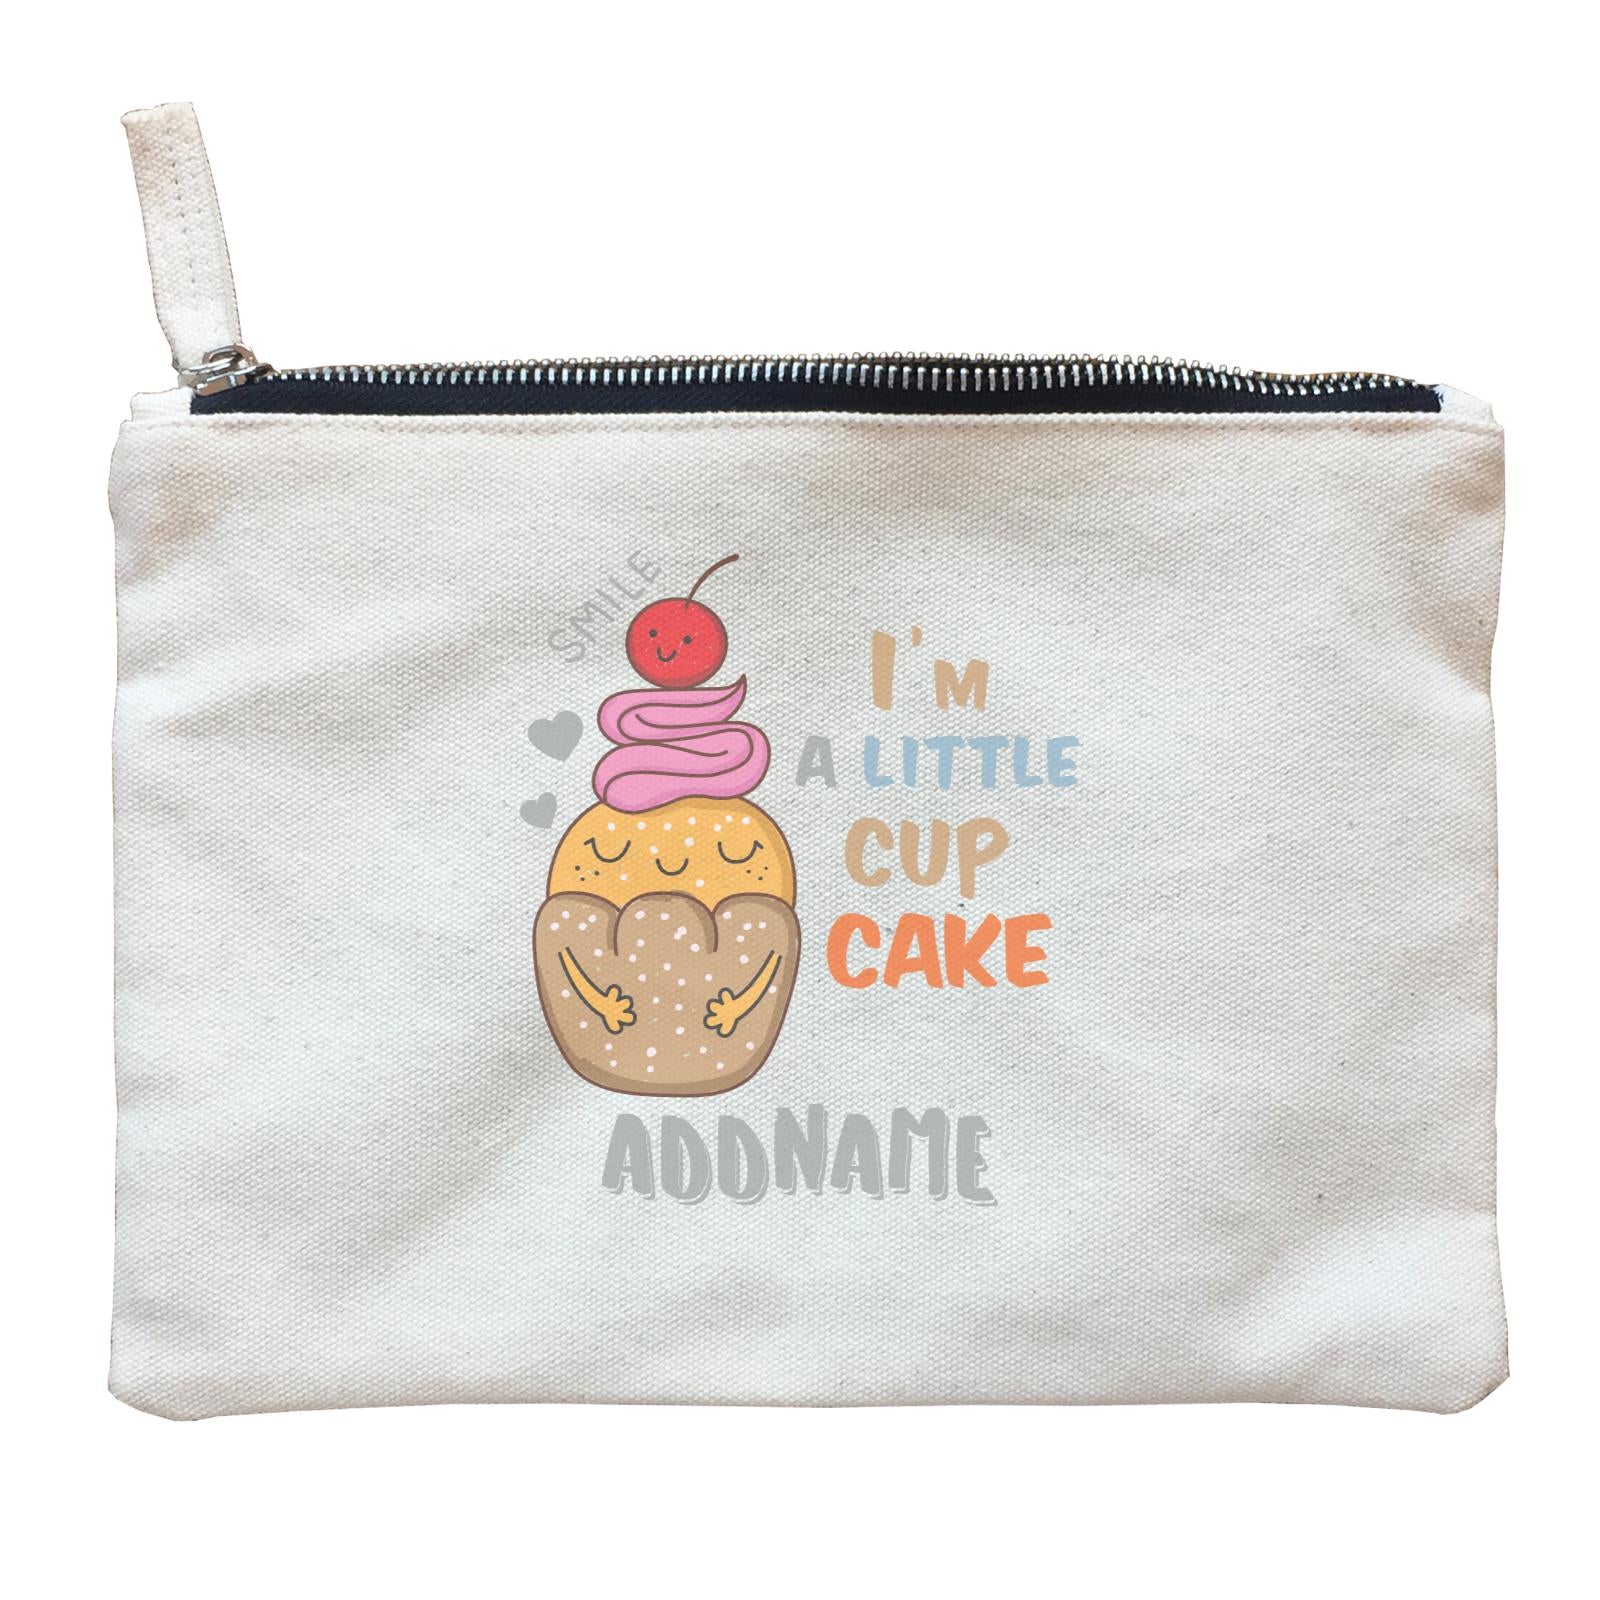 Cool Cute Foods I'm A Little Cup Cake Addname Zipper Pouch